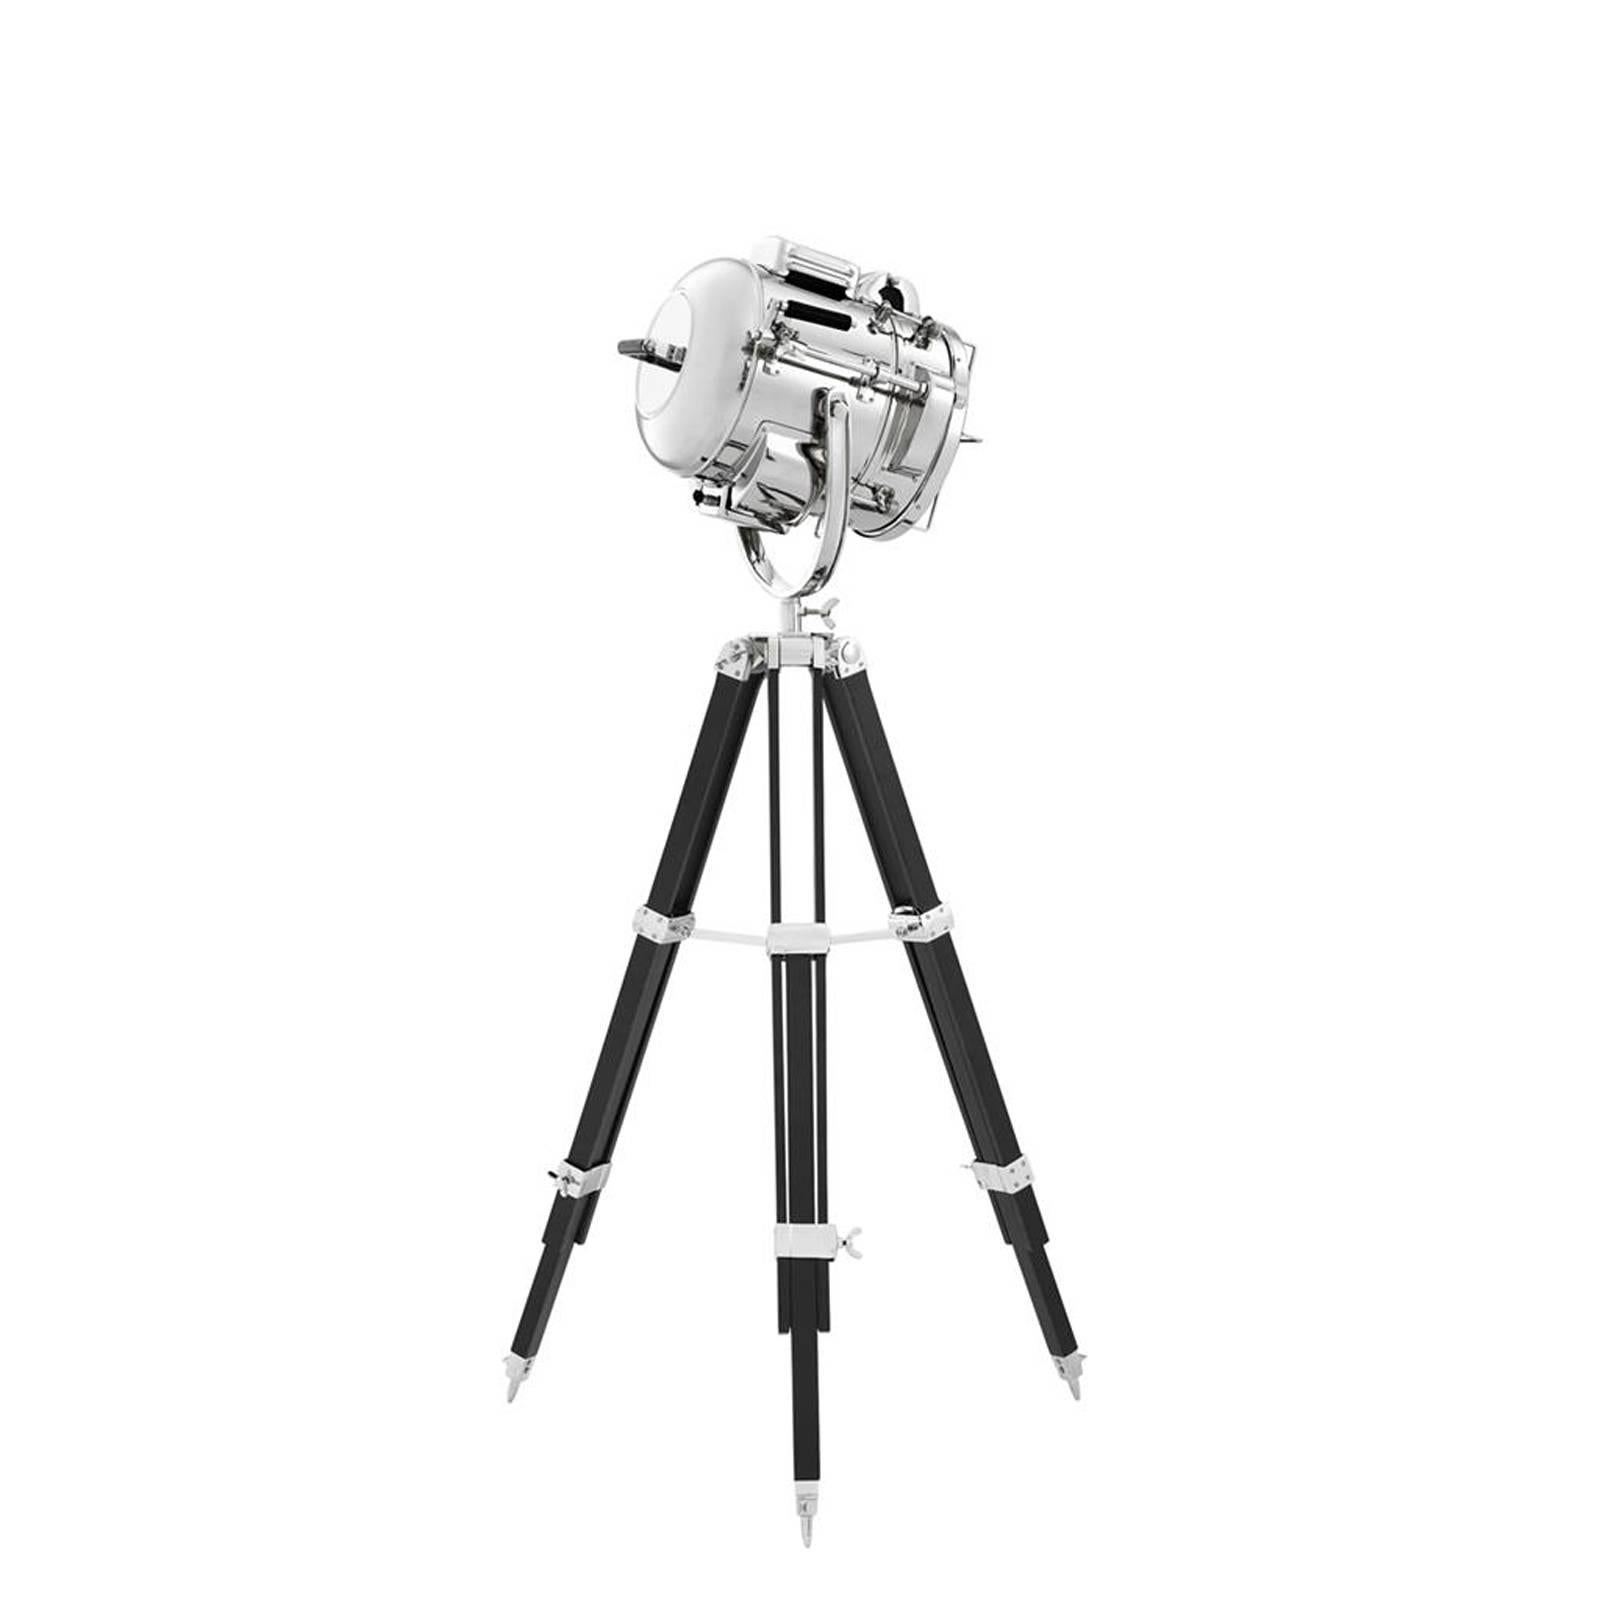 Projector Nautilus with nickel finish lamp,
with clear glass lens. On tripod feet in solid 
wood in black finish. 1 bulb lamp holder type.
Also available with brass
finish lamp with clear glass lens. On tripod
feet in solind wood in brown